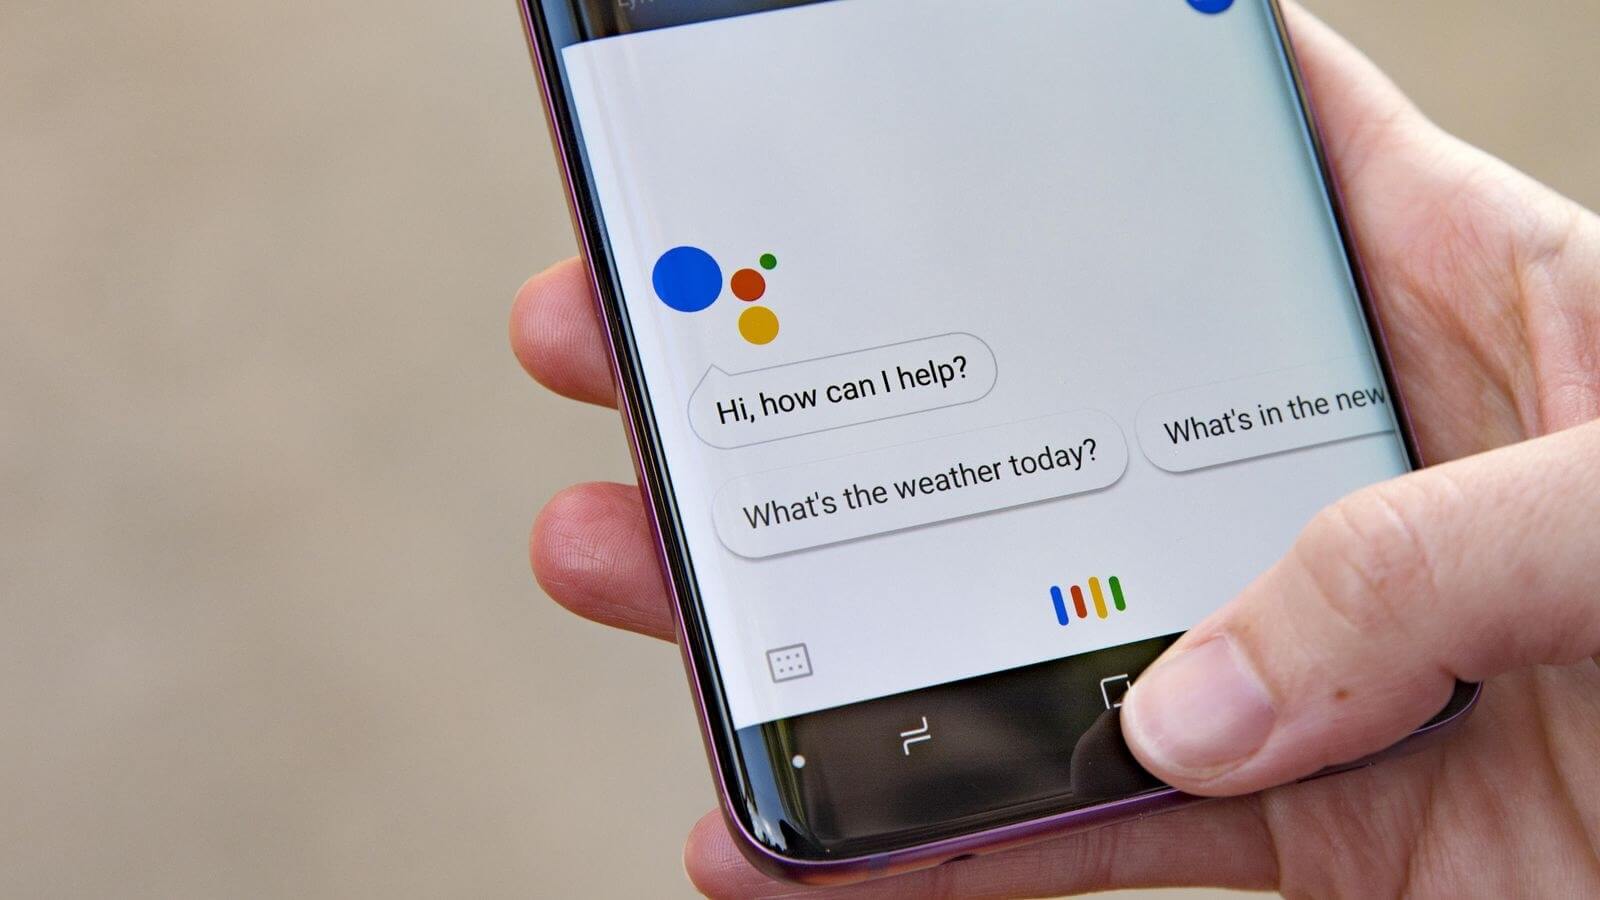 Google's Assistant AI could reach over one billion devices by the end of January